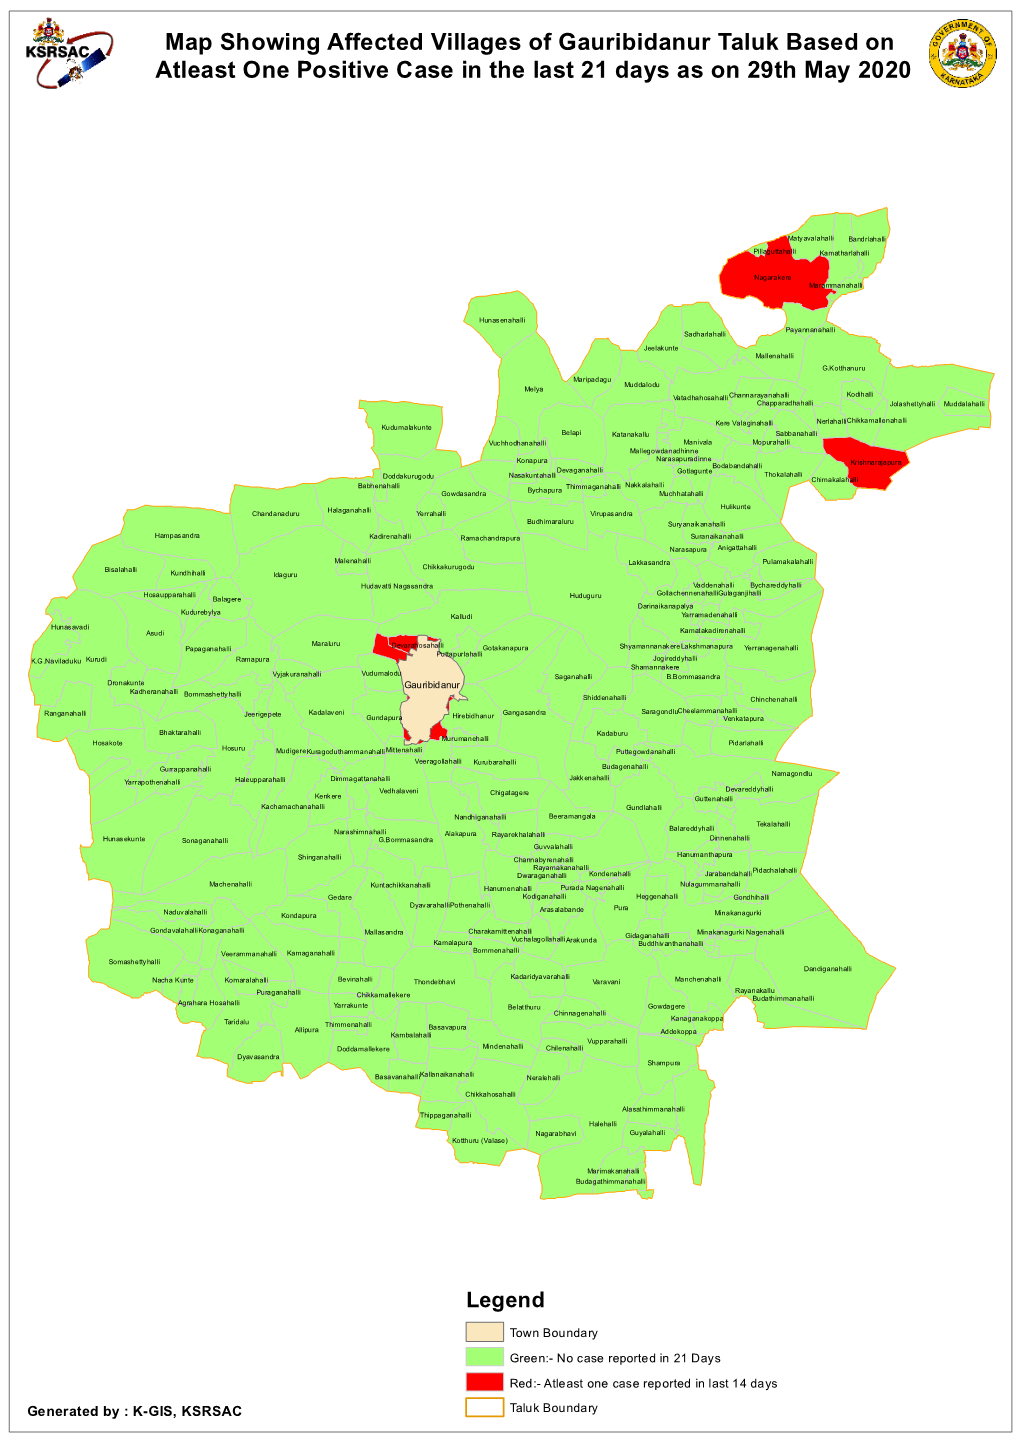 Map Showing Affected Villages of Gauribidanur Taluk Based on Atleast One Positive Case in the Last 21 Days As on 29Th May 2020